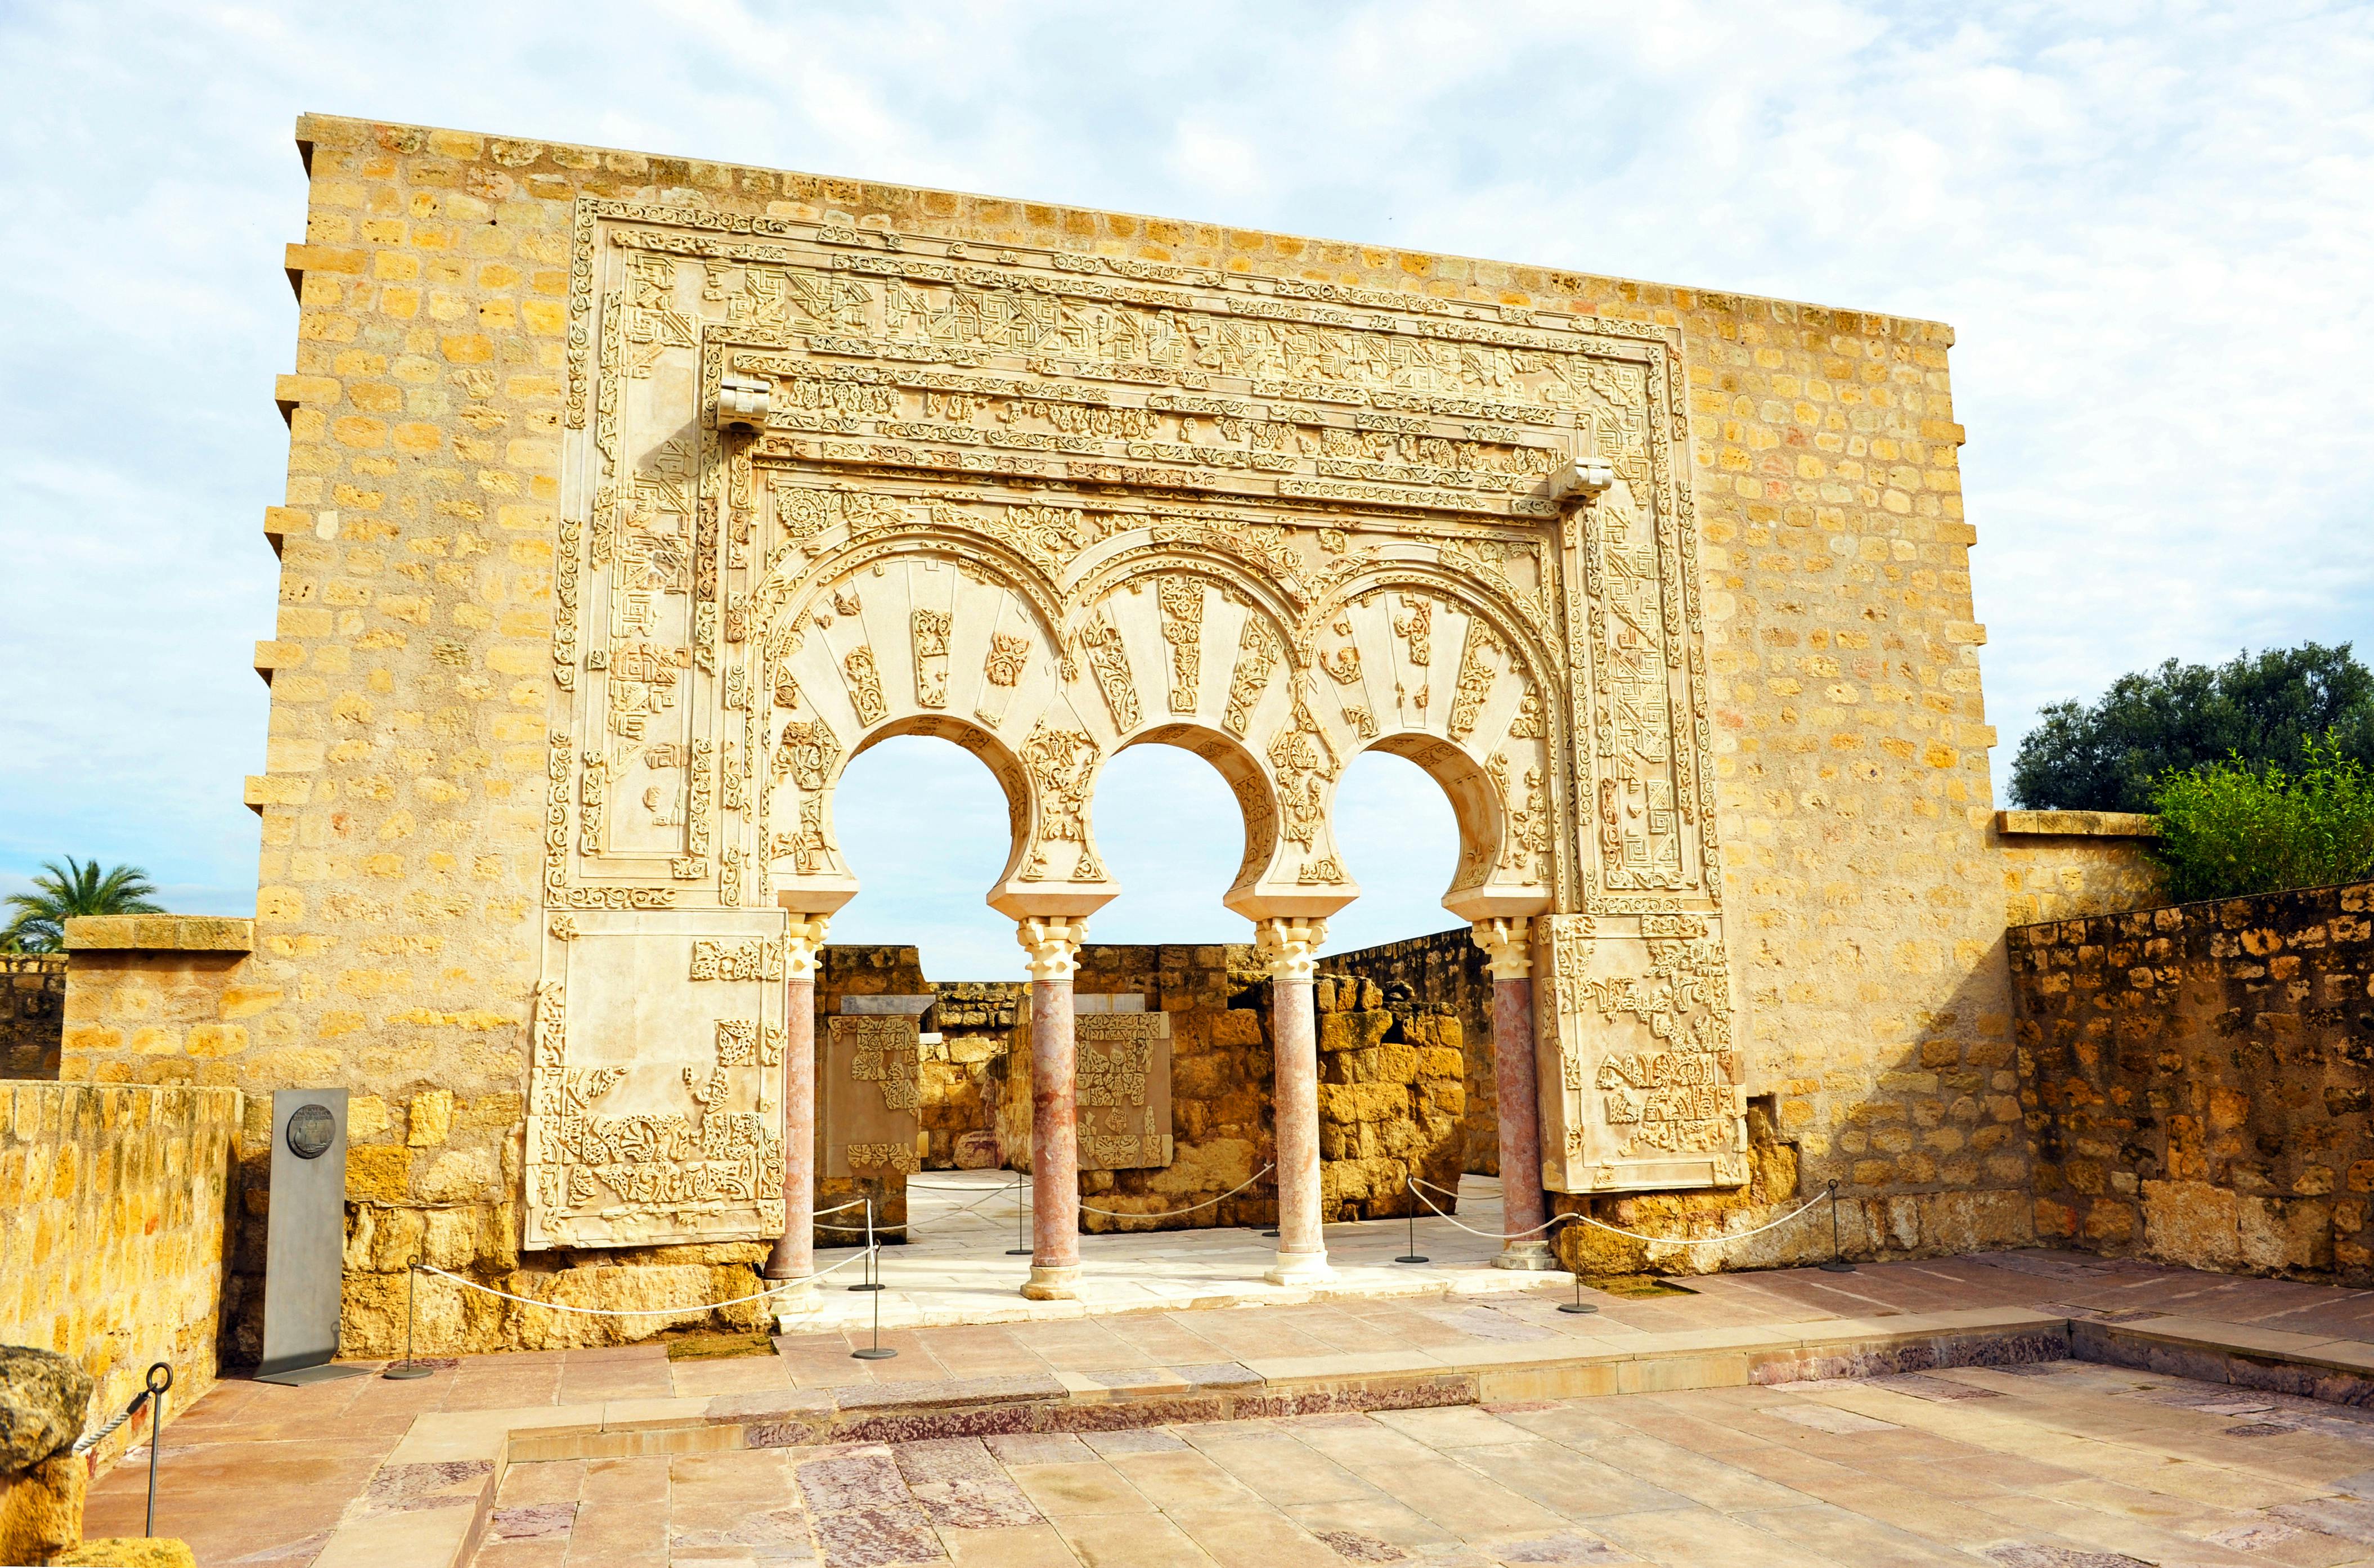 Guided tour of the Medina Azahara archeological site Musement